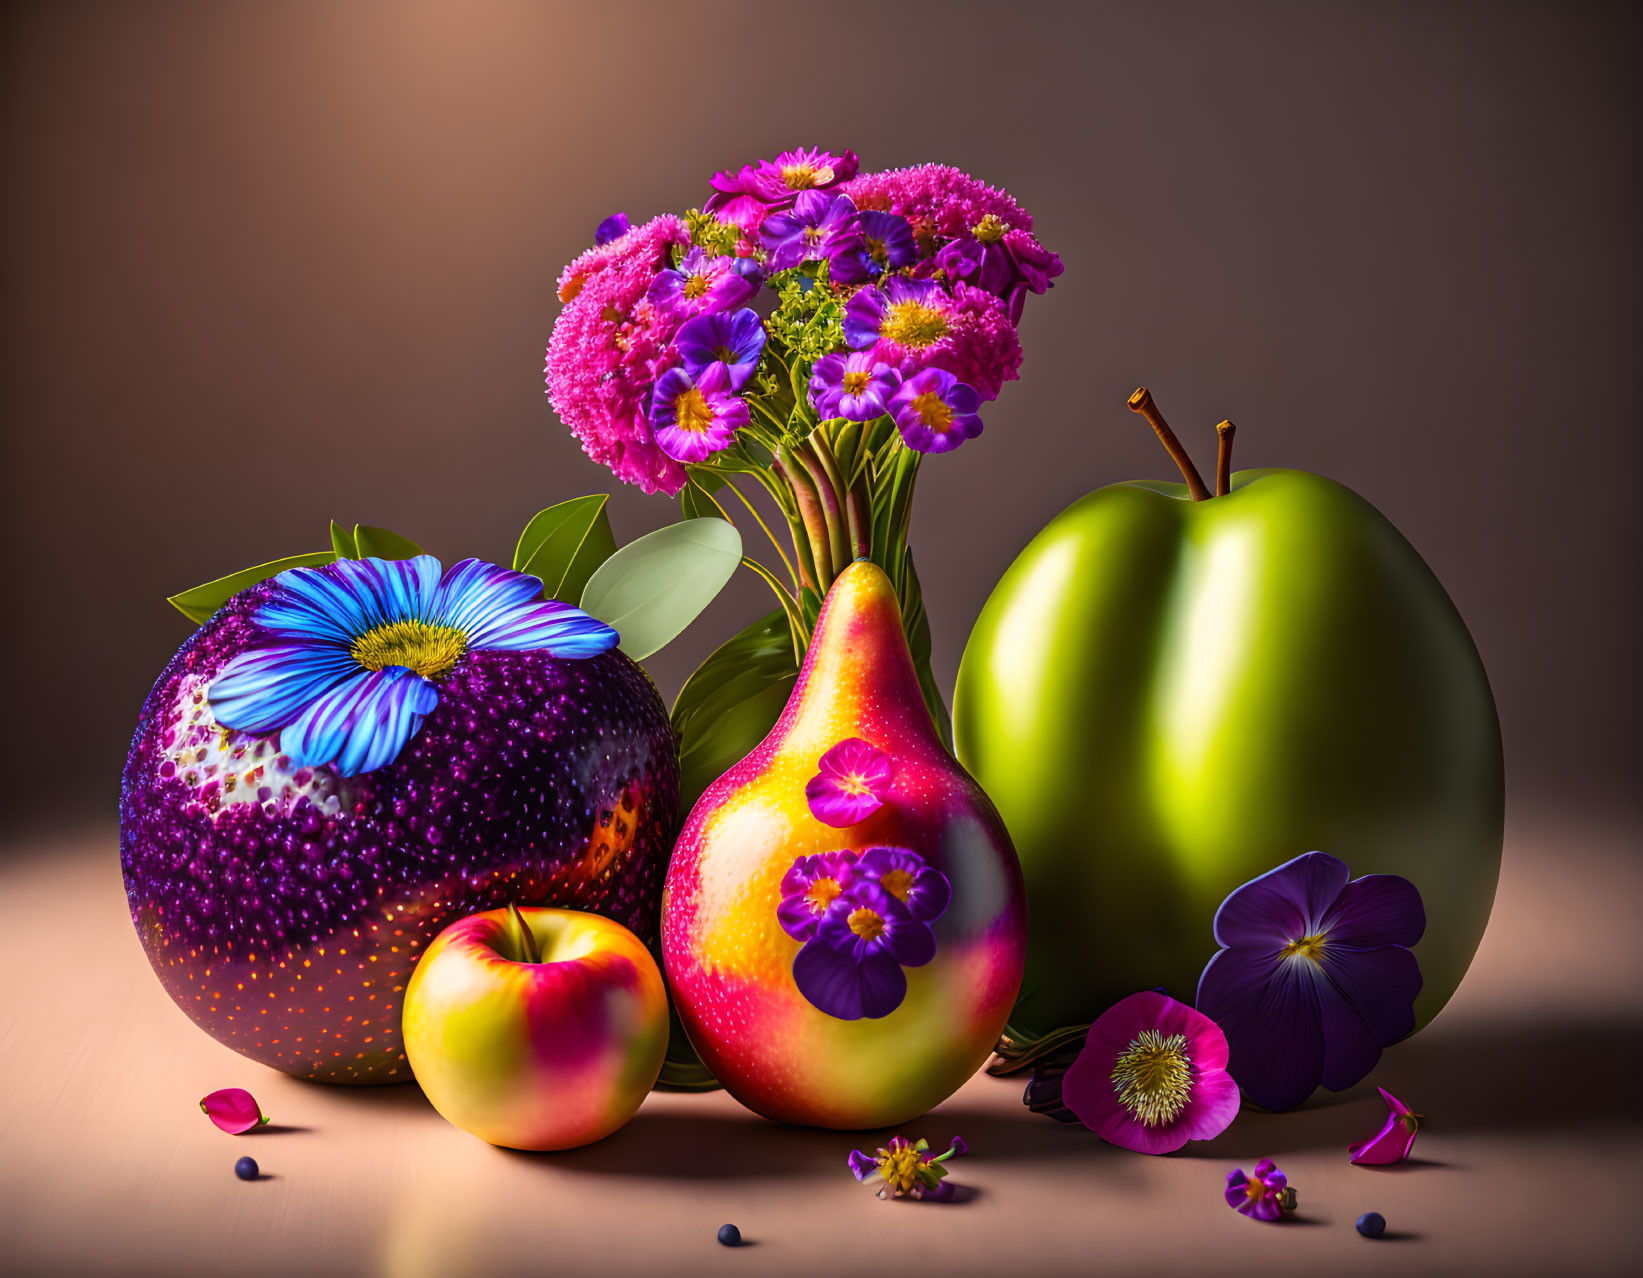 Colorful Still Life of Fruits and Flowers on Warm Background